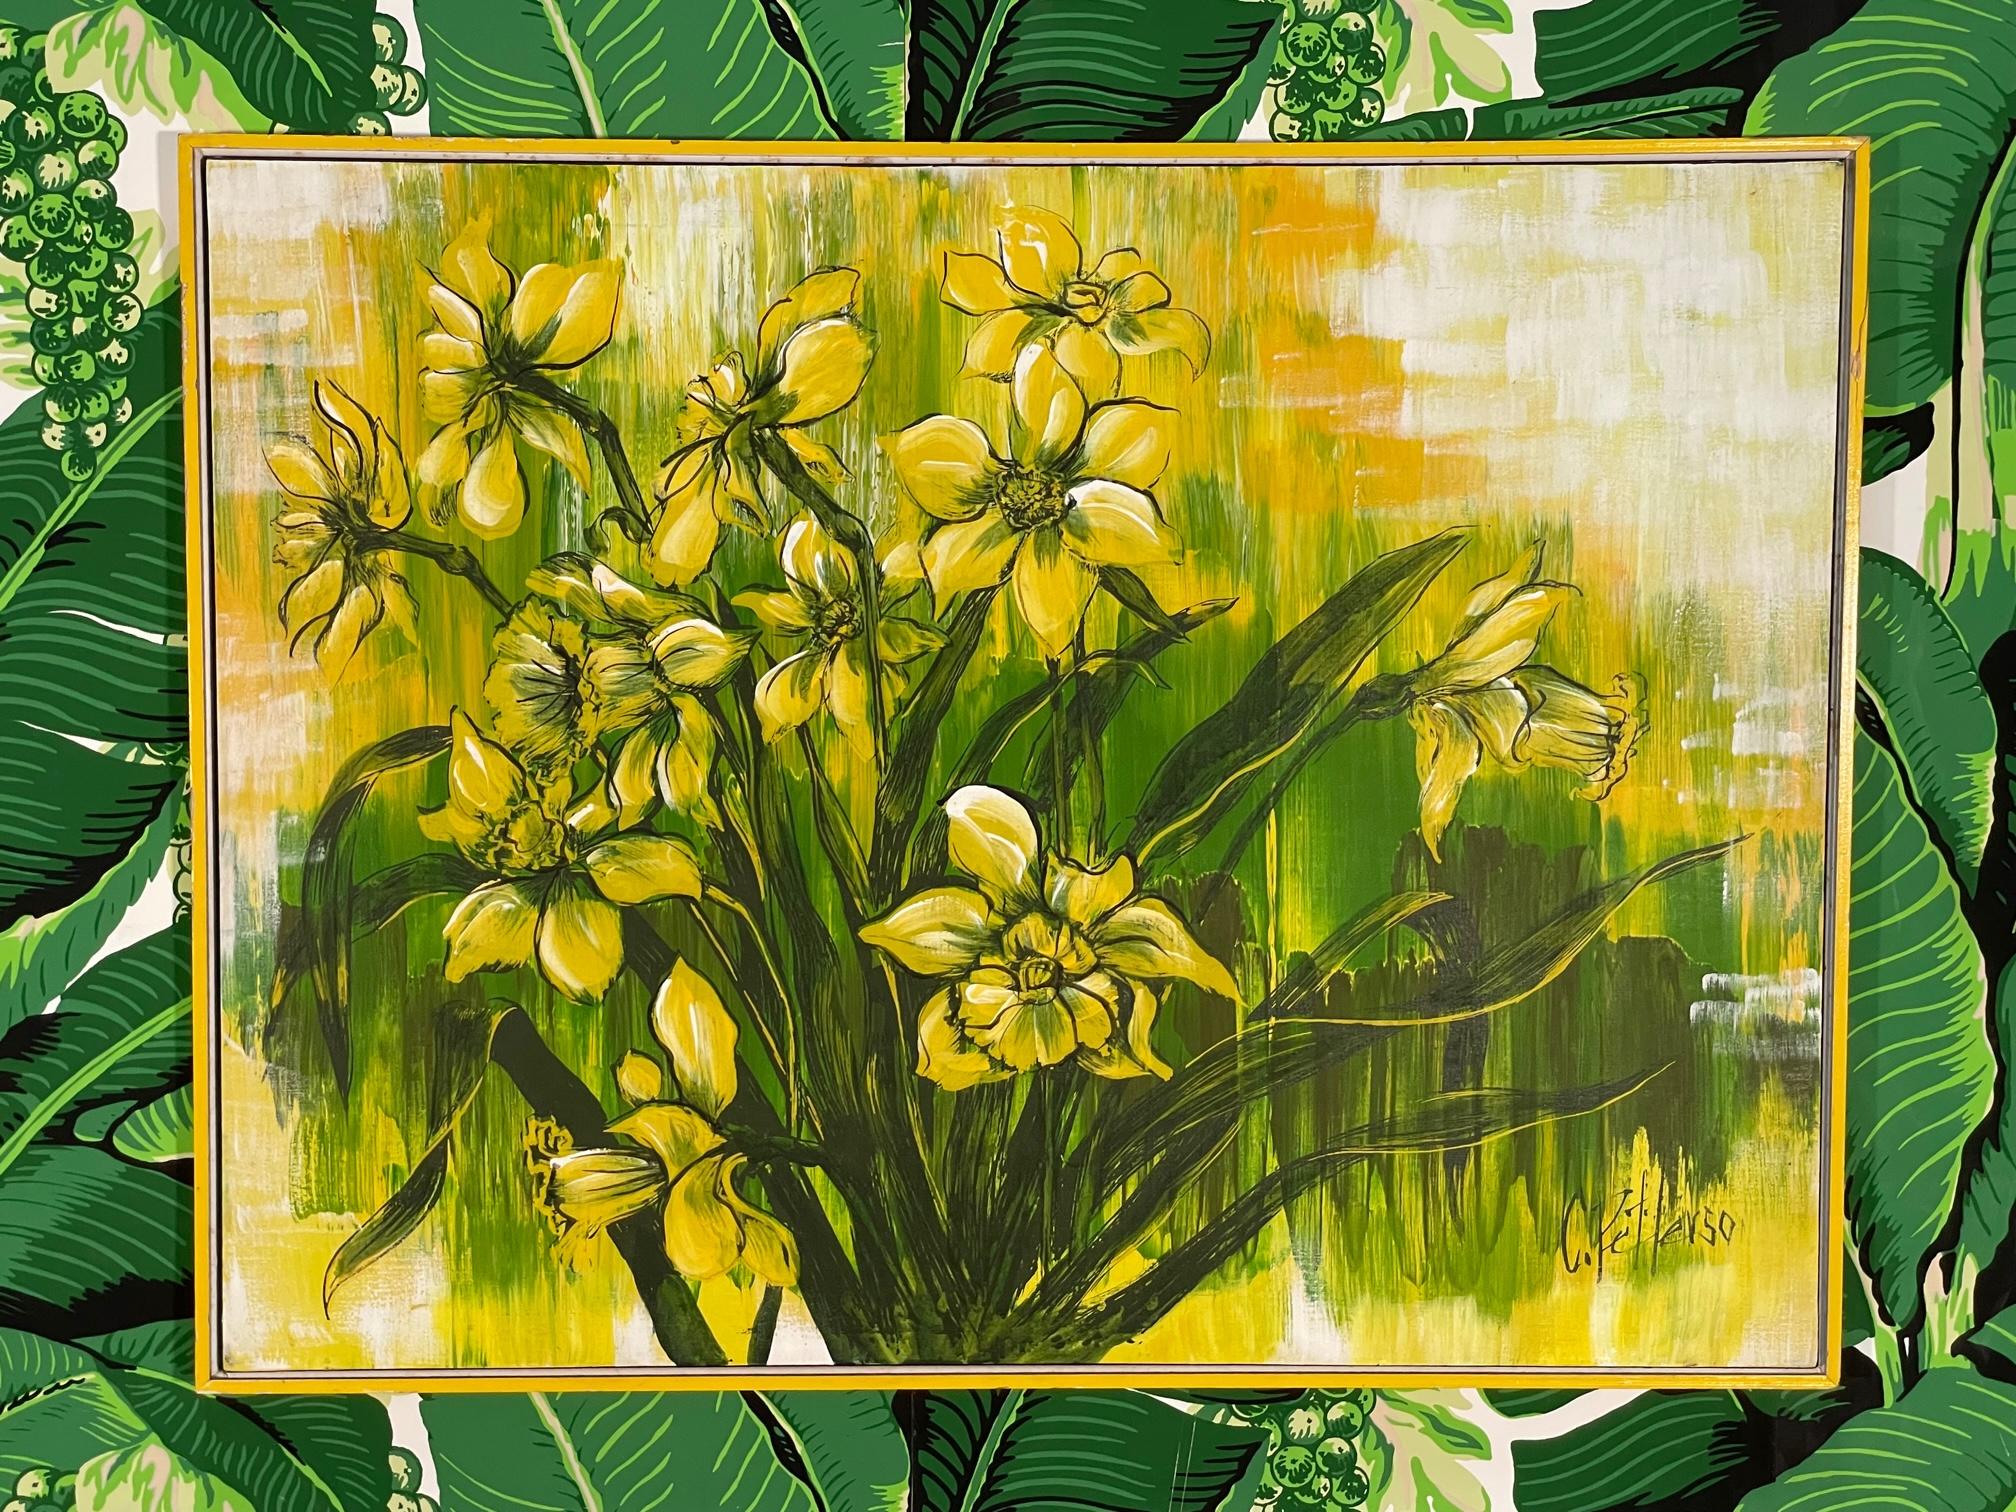 Large 70s still life painting features bold yellows and greens and a yellow wood frame. Good condition with imperfections consistent with age, see photos for condition details.
For a shipping quote to your exact zip code, please message us.
